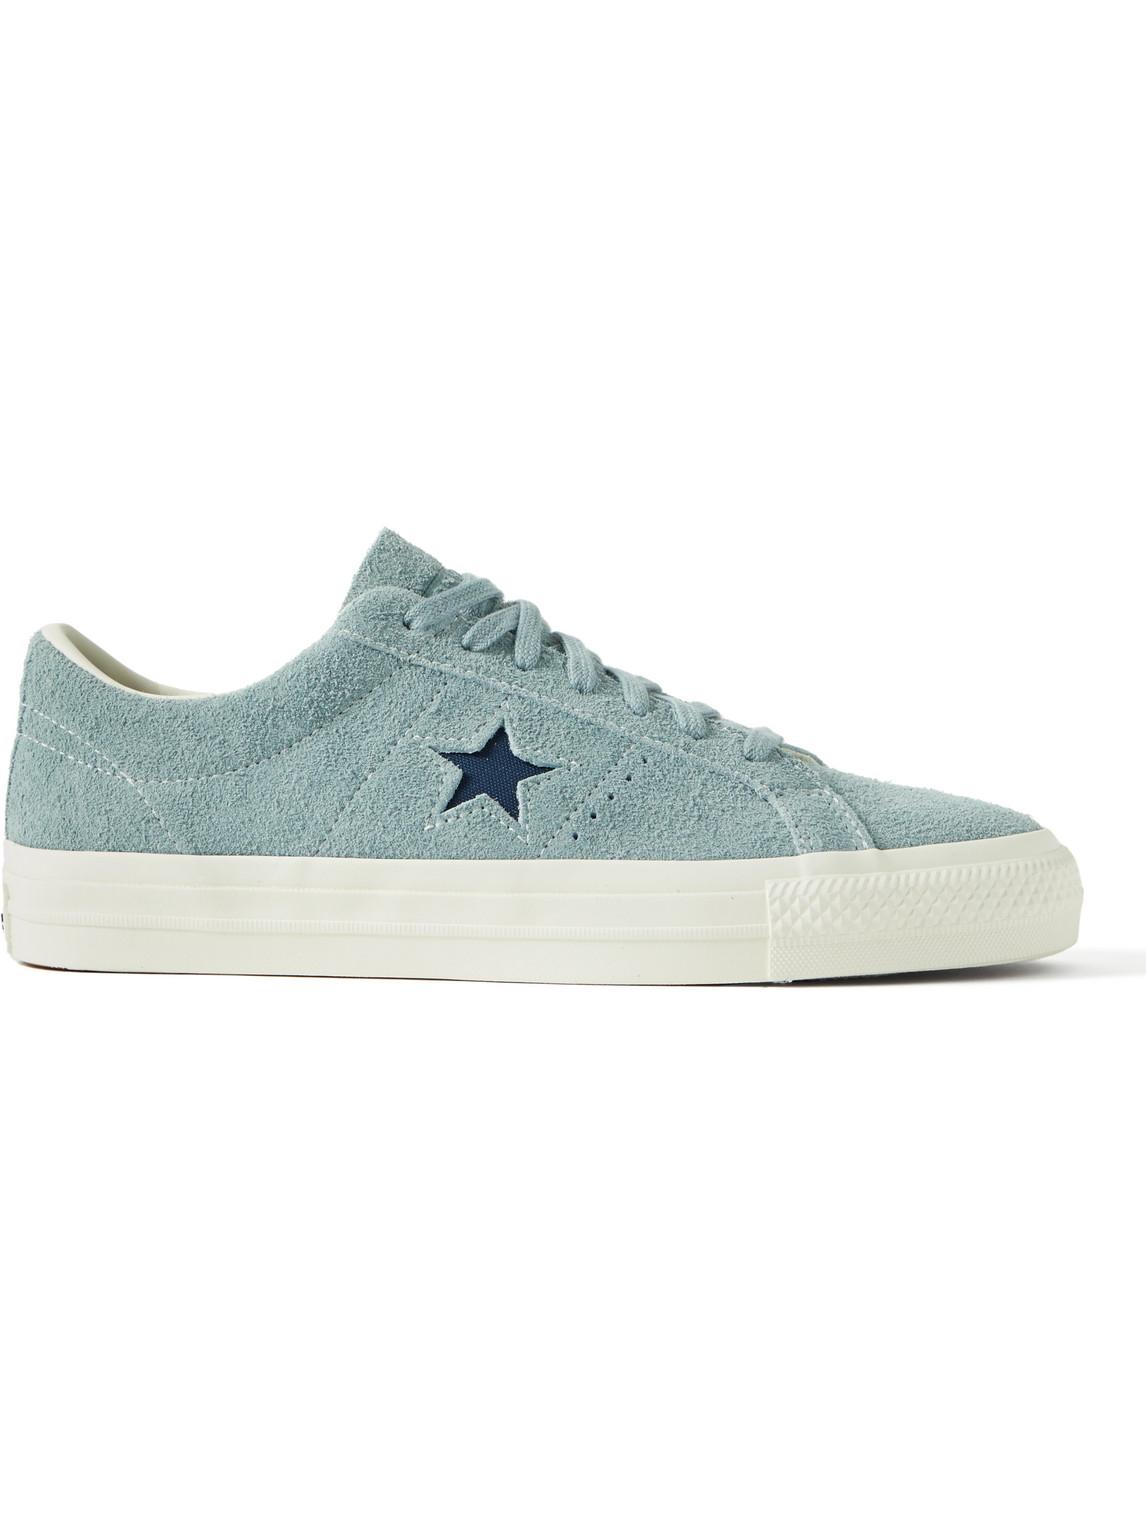 Converse One Star Pro Canvas-trimmed Suede Sneakers in Blue for Men | Lyst